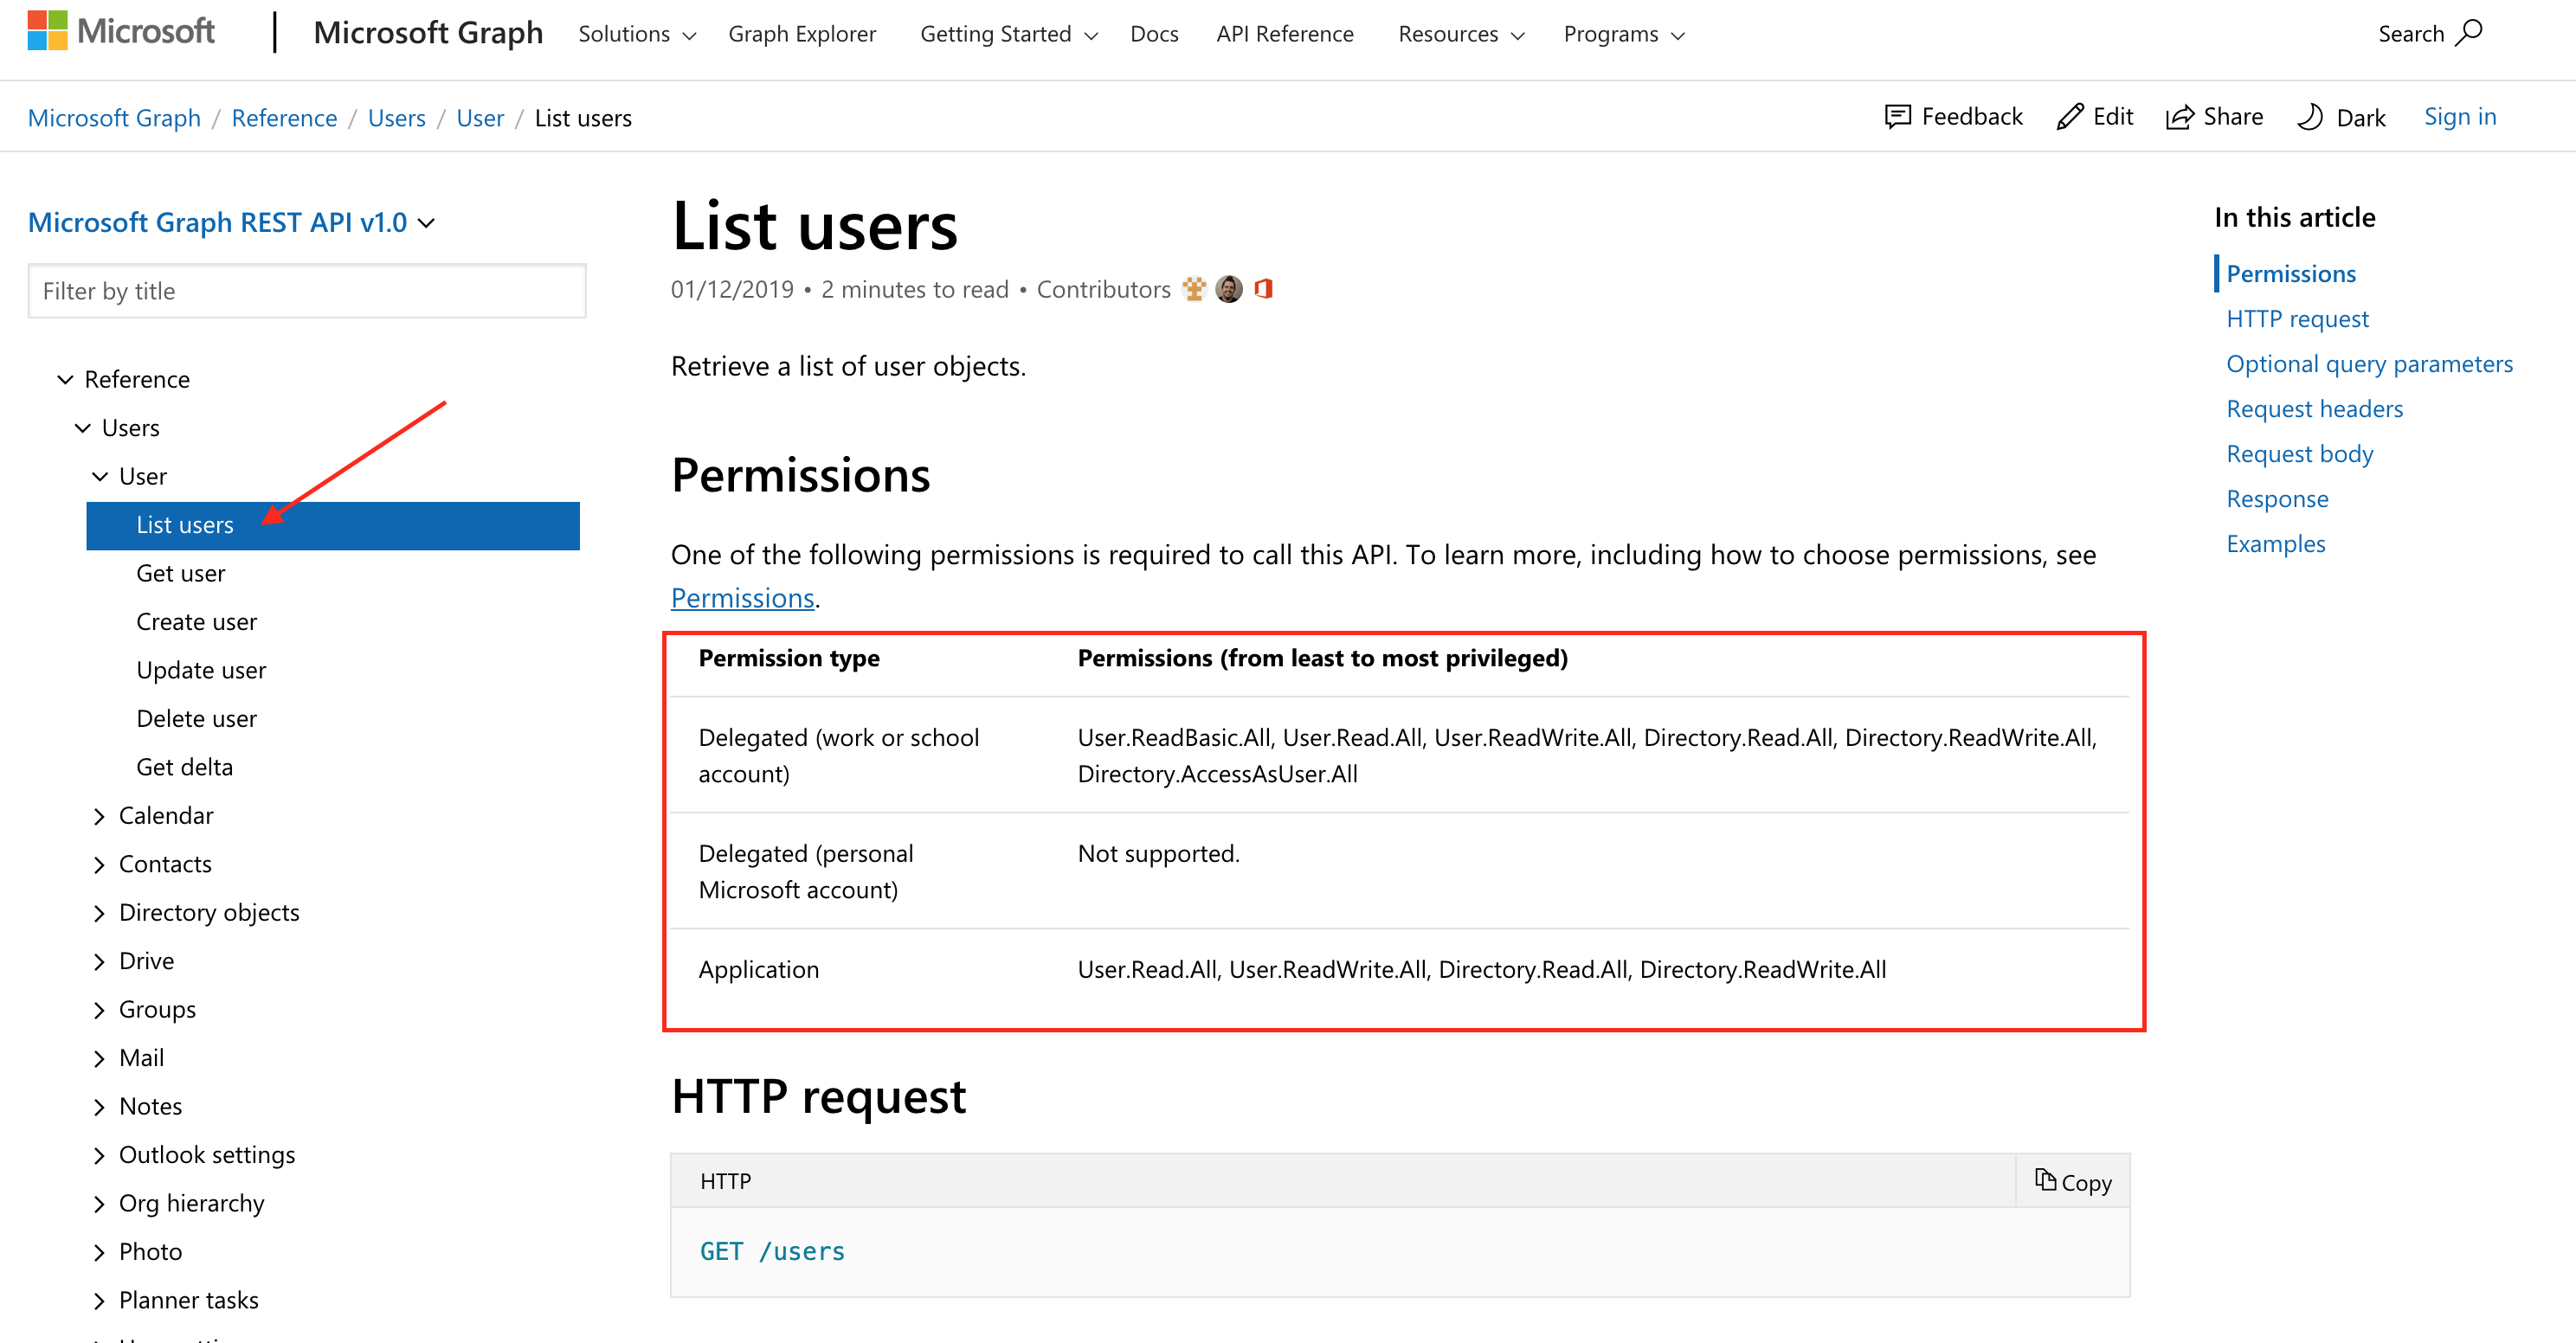 Microsoft Graph Reference: Action Permissions